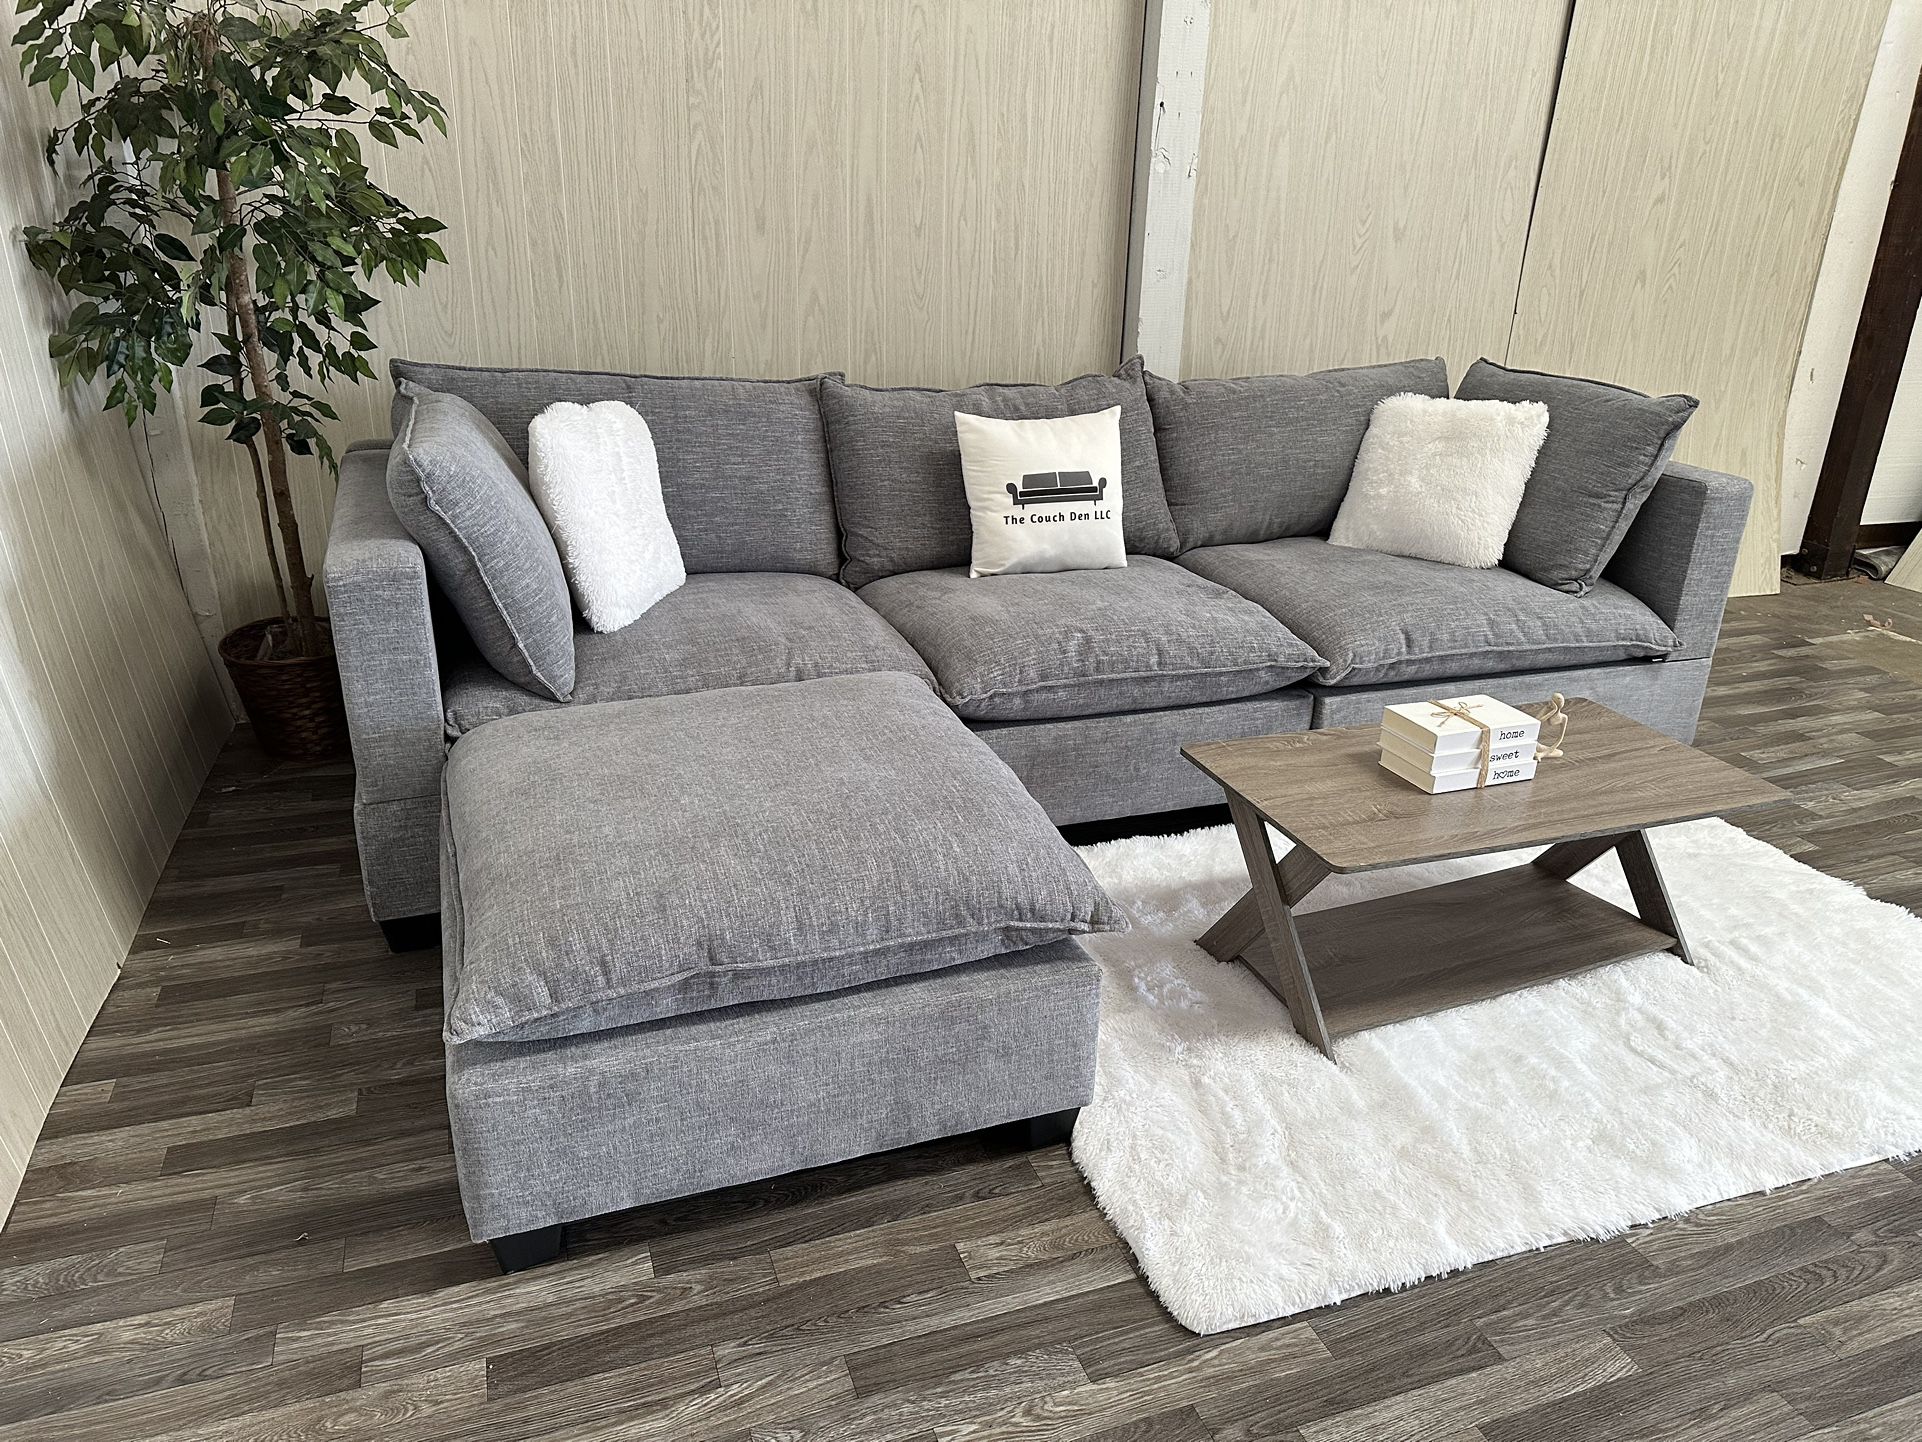 NEW! Gray Modular Cloud Sectional Couch - Delivery & Financing Available 